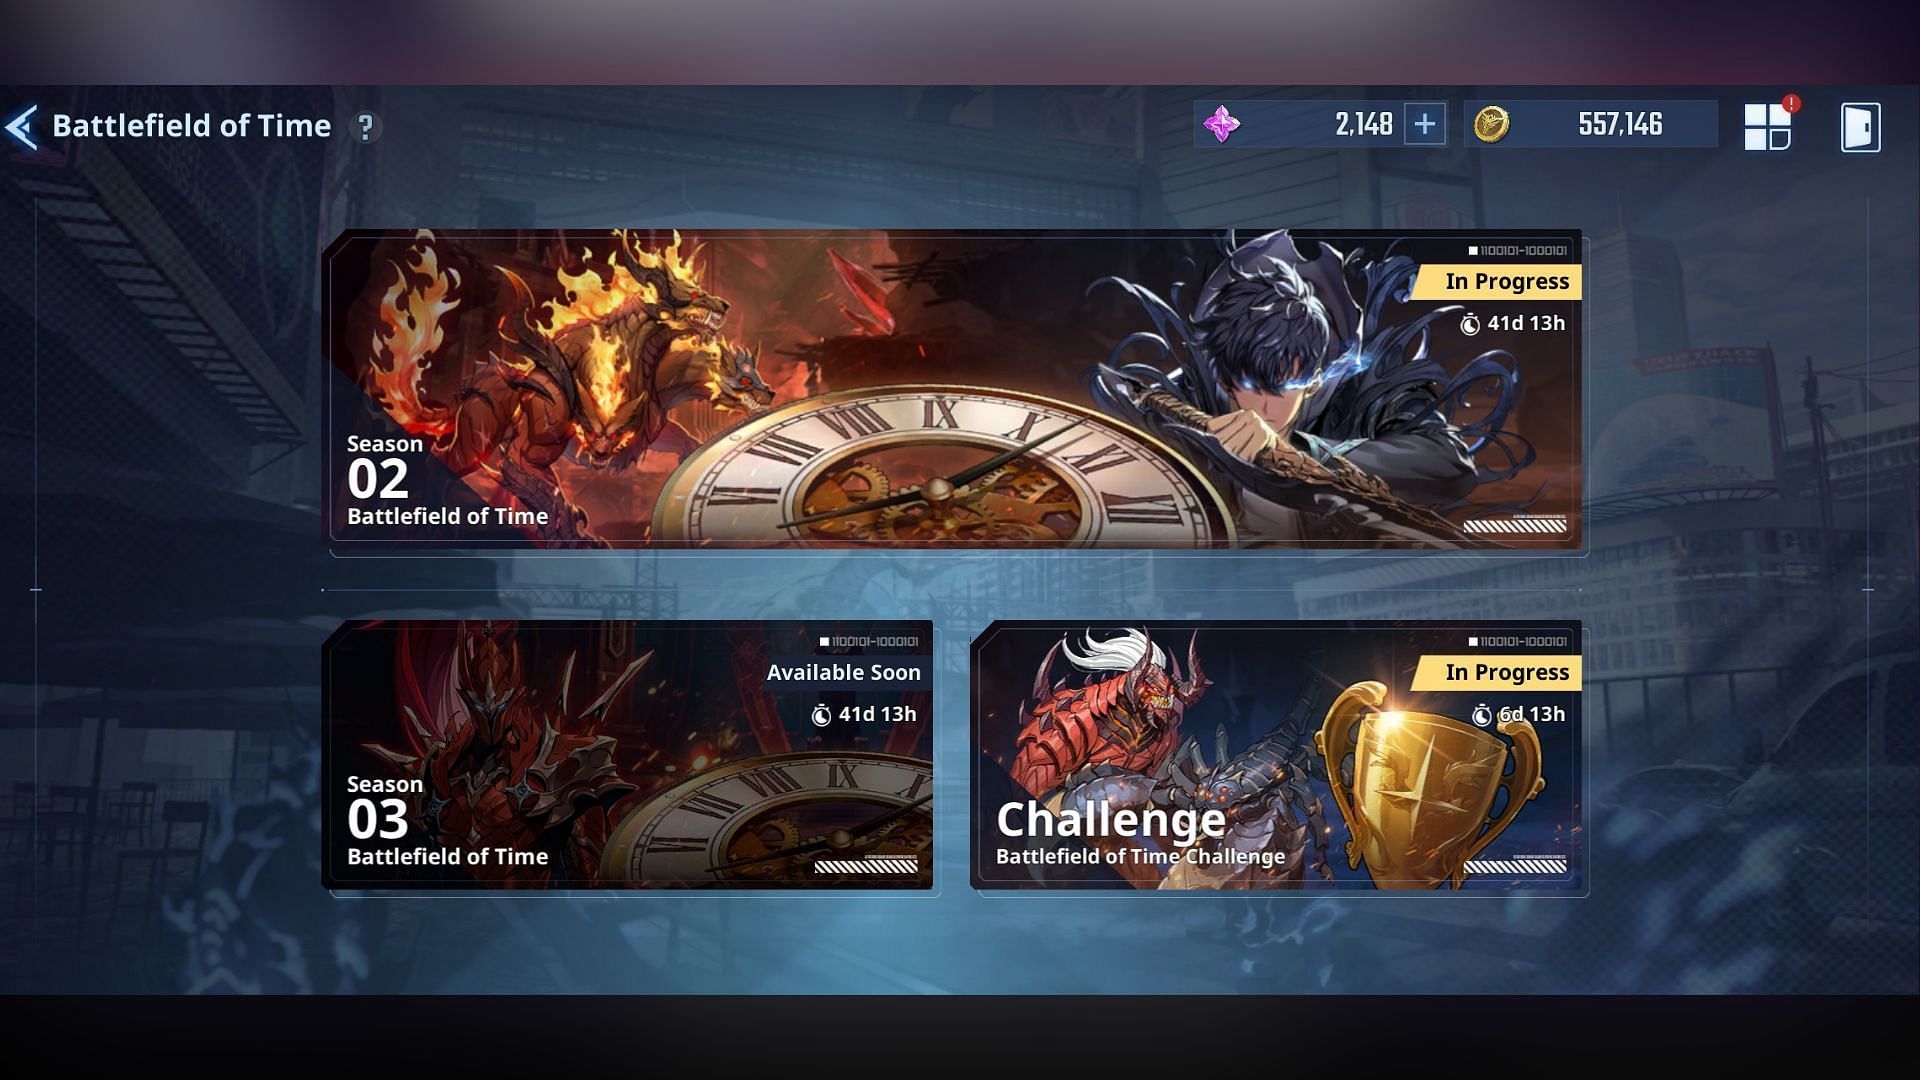 Netmarble has adjusted the abilities of Sung Jinwoo, Hunters, and monsters in the Battlefield of Time game mode (Image via Netmarble)